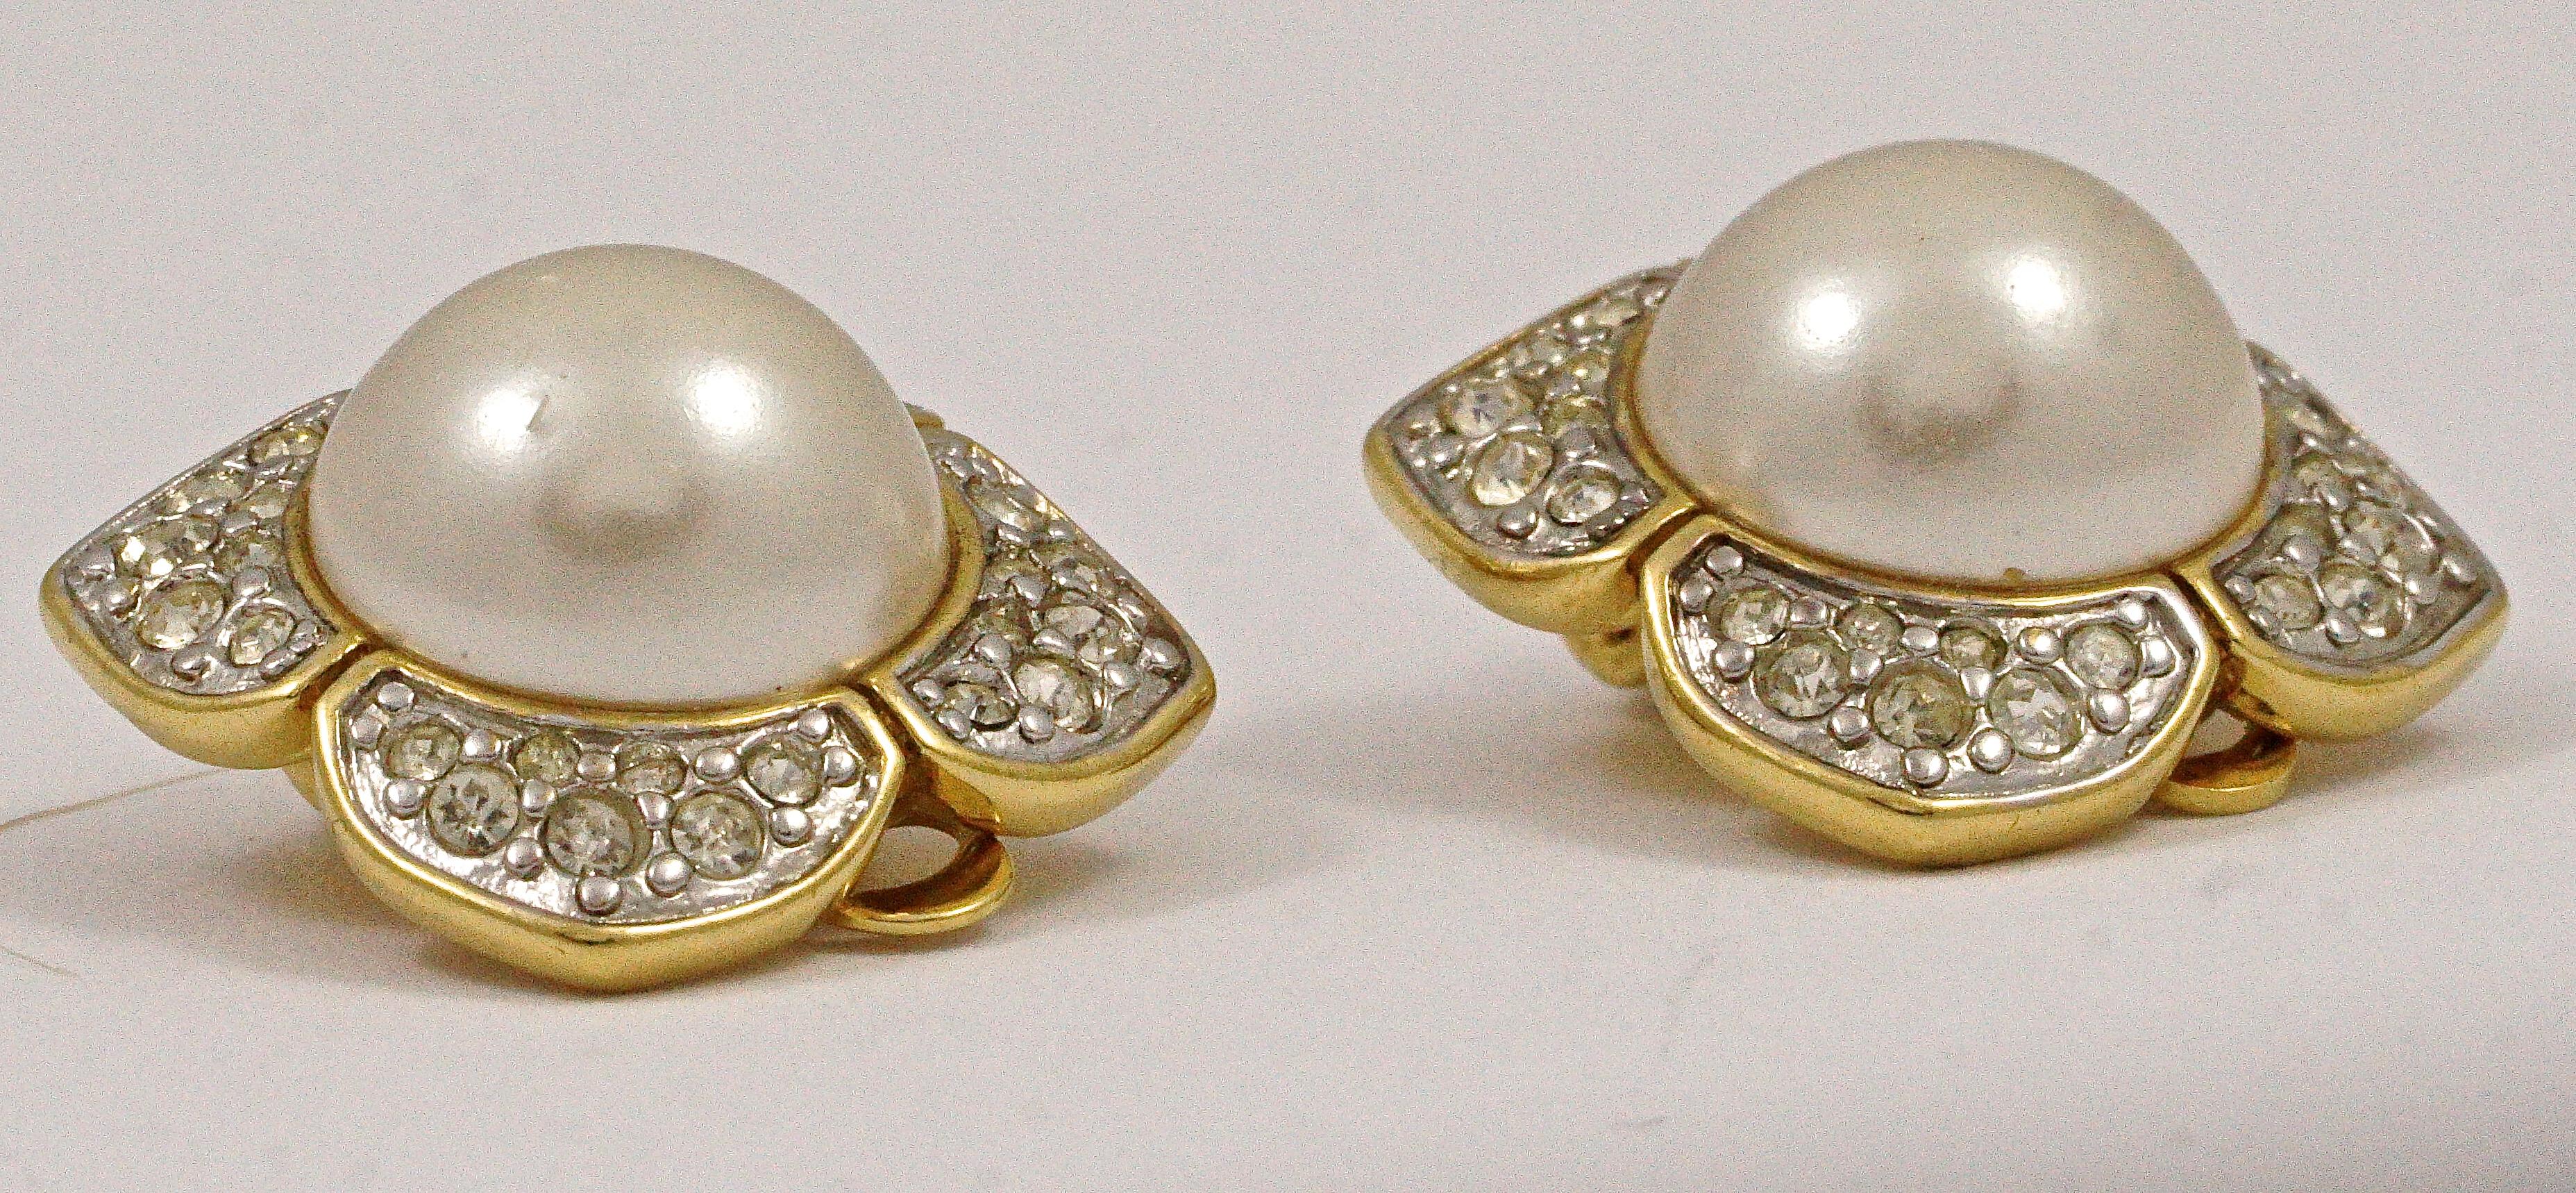 Lovely Nina Ricci gold plated clip on earrings featuring faux pearls surrounded by clear rhinestones. Measuring 1.75cm / .68 inch on each side. They are in very good condition, with minor marks to the pearls. Circa 1980s.

These are stylish vintage